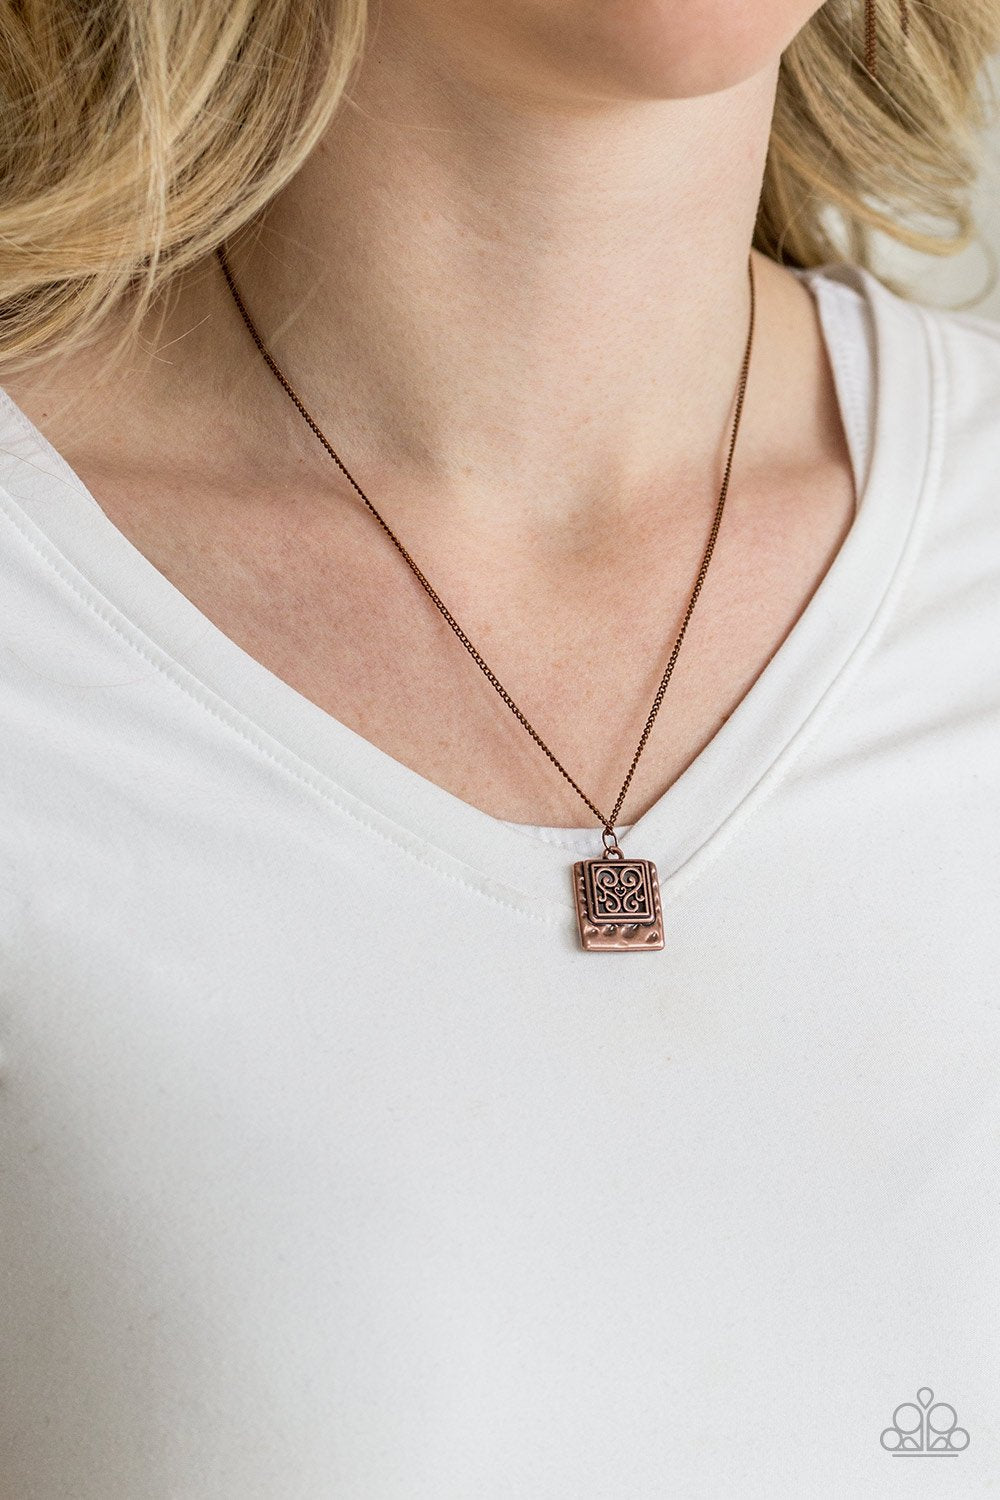 Back to Square One - copper - Paparazzi necklace